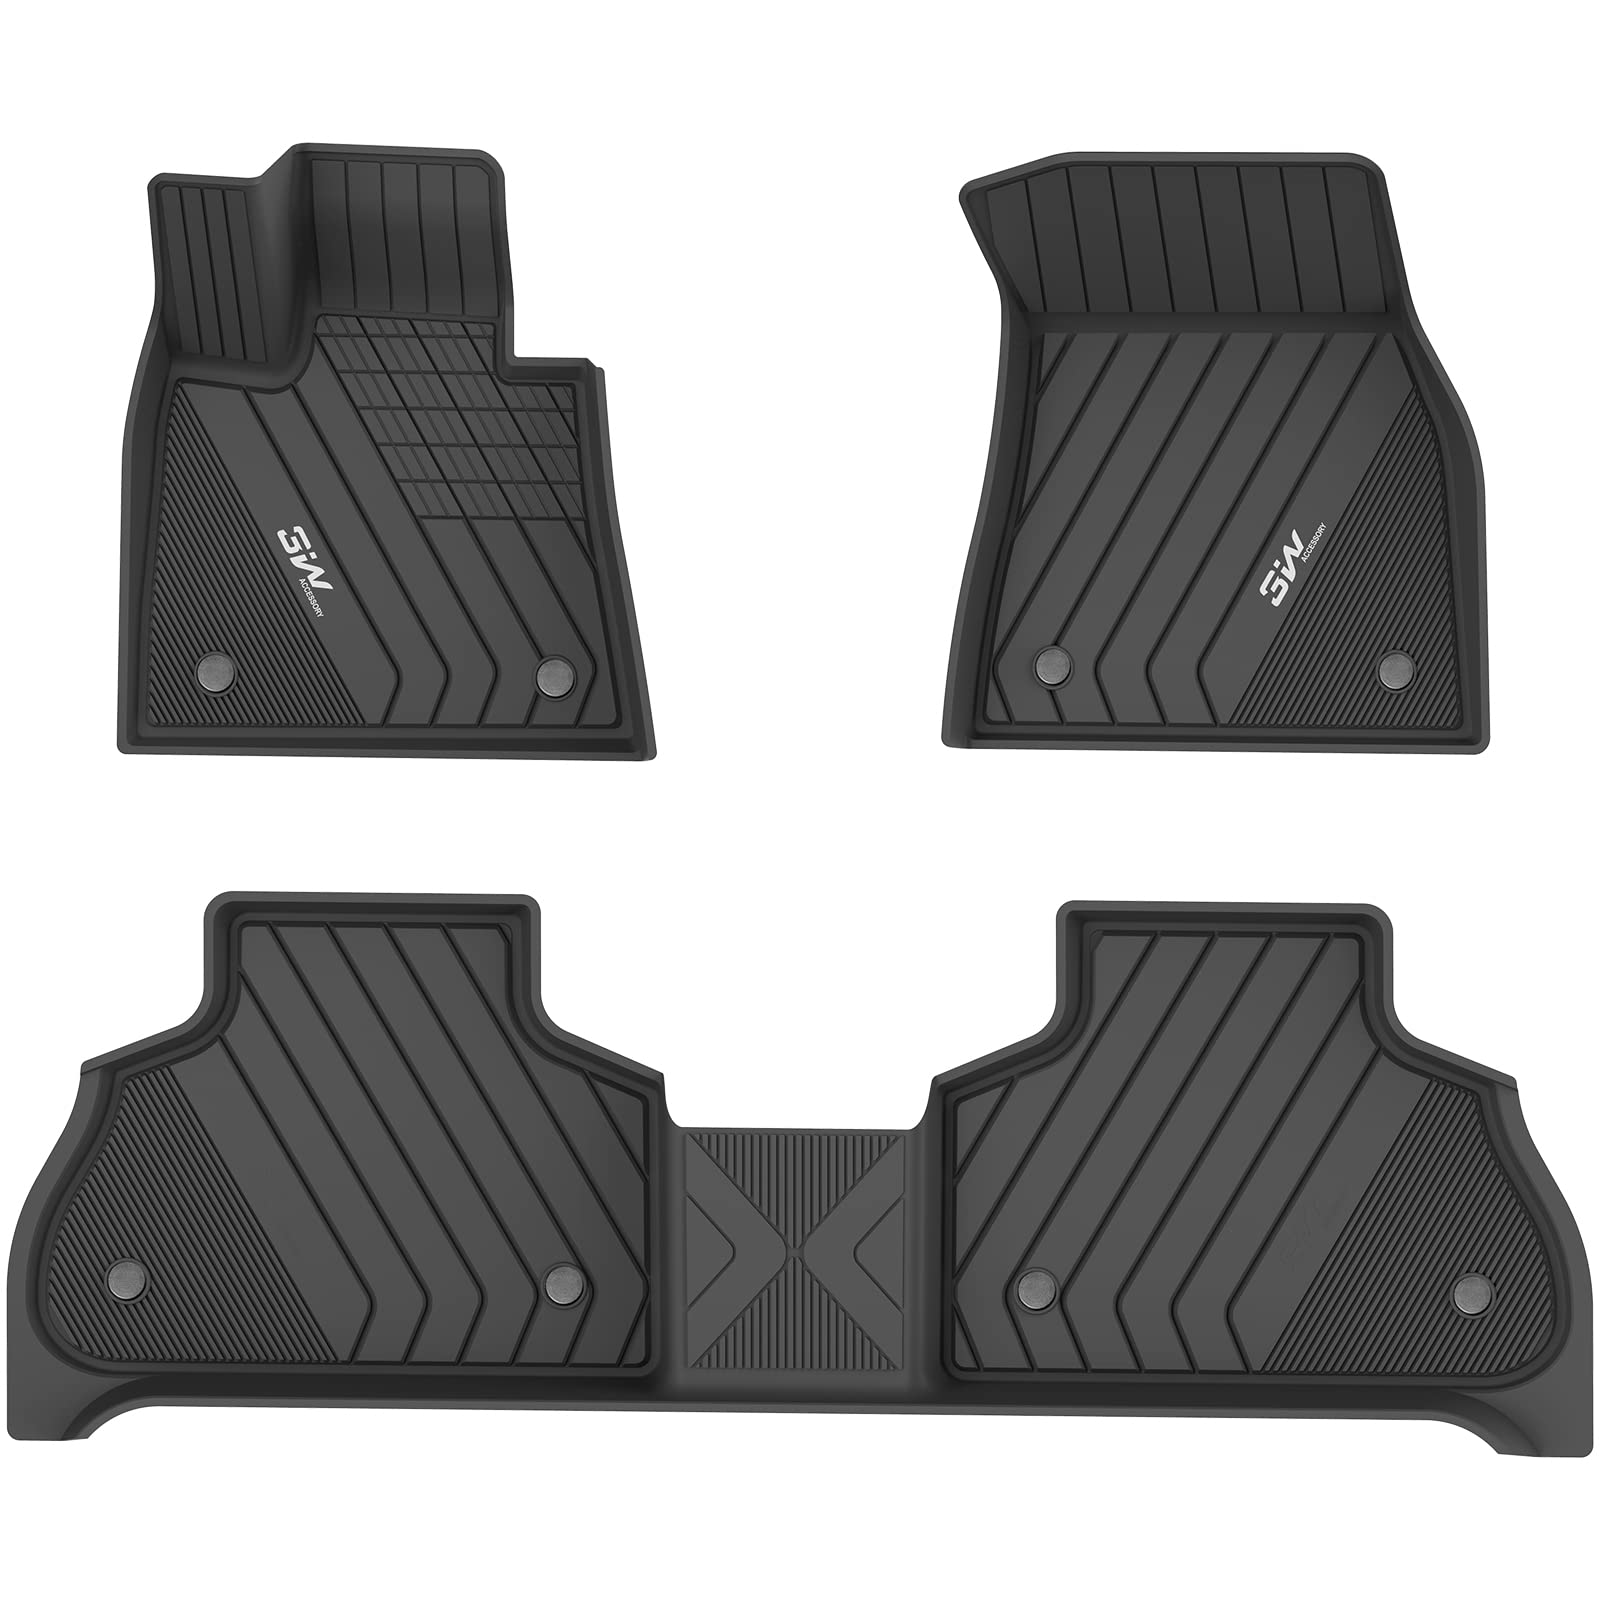 3W BMW X7 2019-2024 7 Seats 1st & 2nd Row Custom Floor Mats TPE Material & All-Weather Protection Vehicles & Parts 3W 2019-2024 7-Seat X7 1st&2nd Row Mats